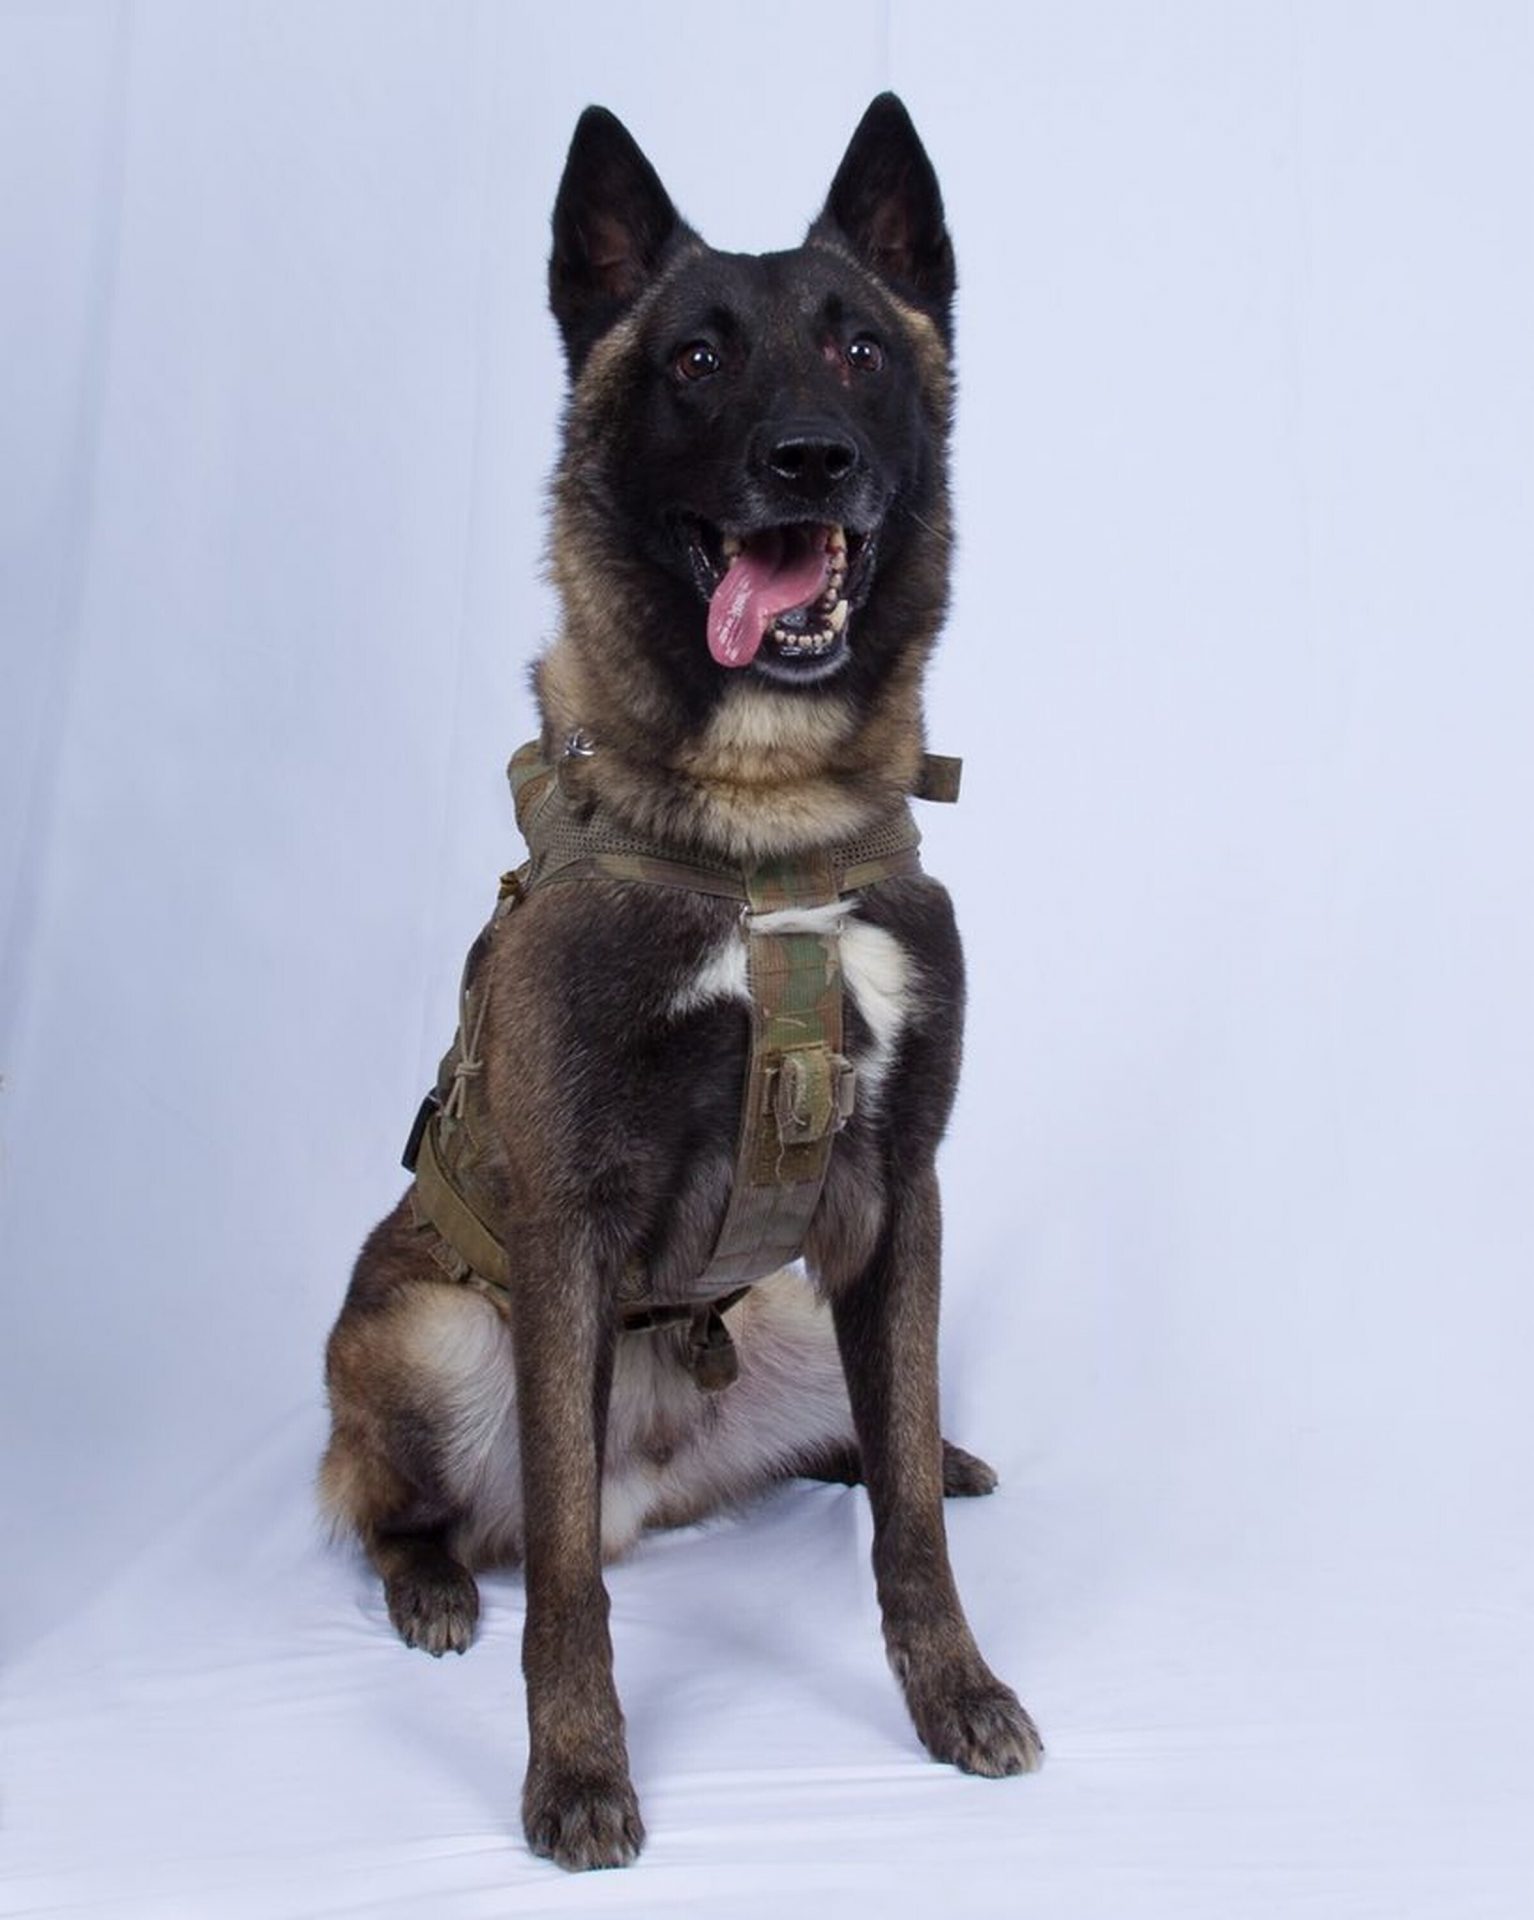 In this photo provided by the White House via the Twitter account of President Donald Trump after it was declassified by Trump, a photo of the military working dog that was injured tracking down Abu Bakr al-Baghdadi in a tunnel beneath his compound in Syria. Joint chiefs Chairman Gen. Mark Milley told reporters Monday that the animal "performed a tremendous service" and said the dog was "slightly wounded" but is now recovering and has returned to duty at an undisclosed location. The dog's name remains classified.